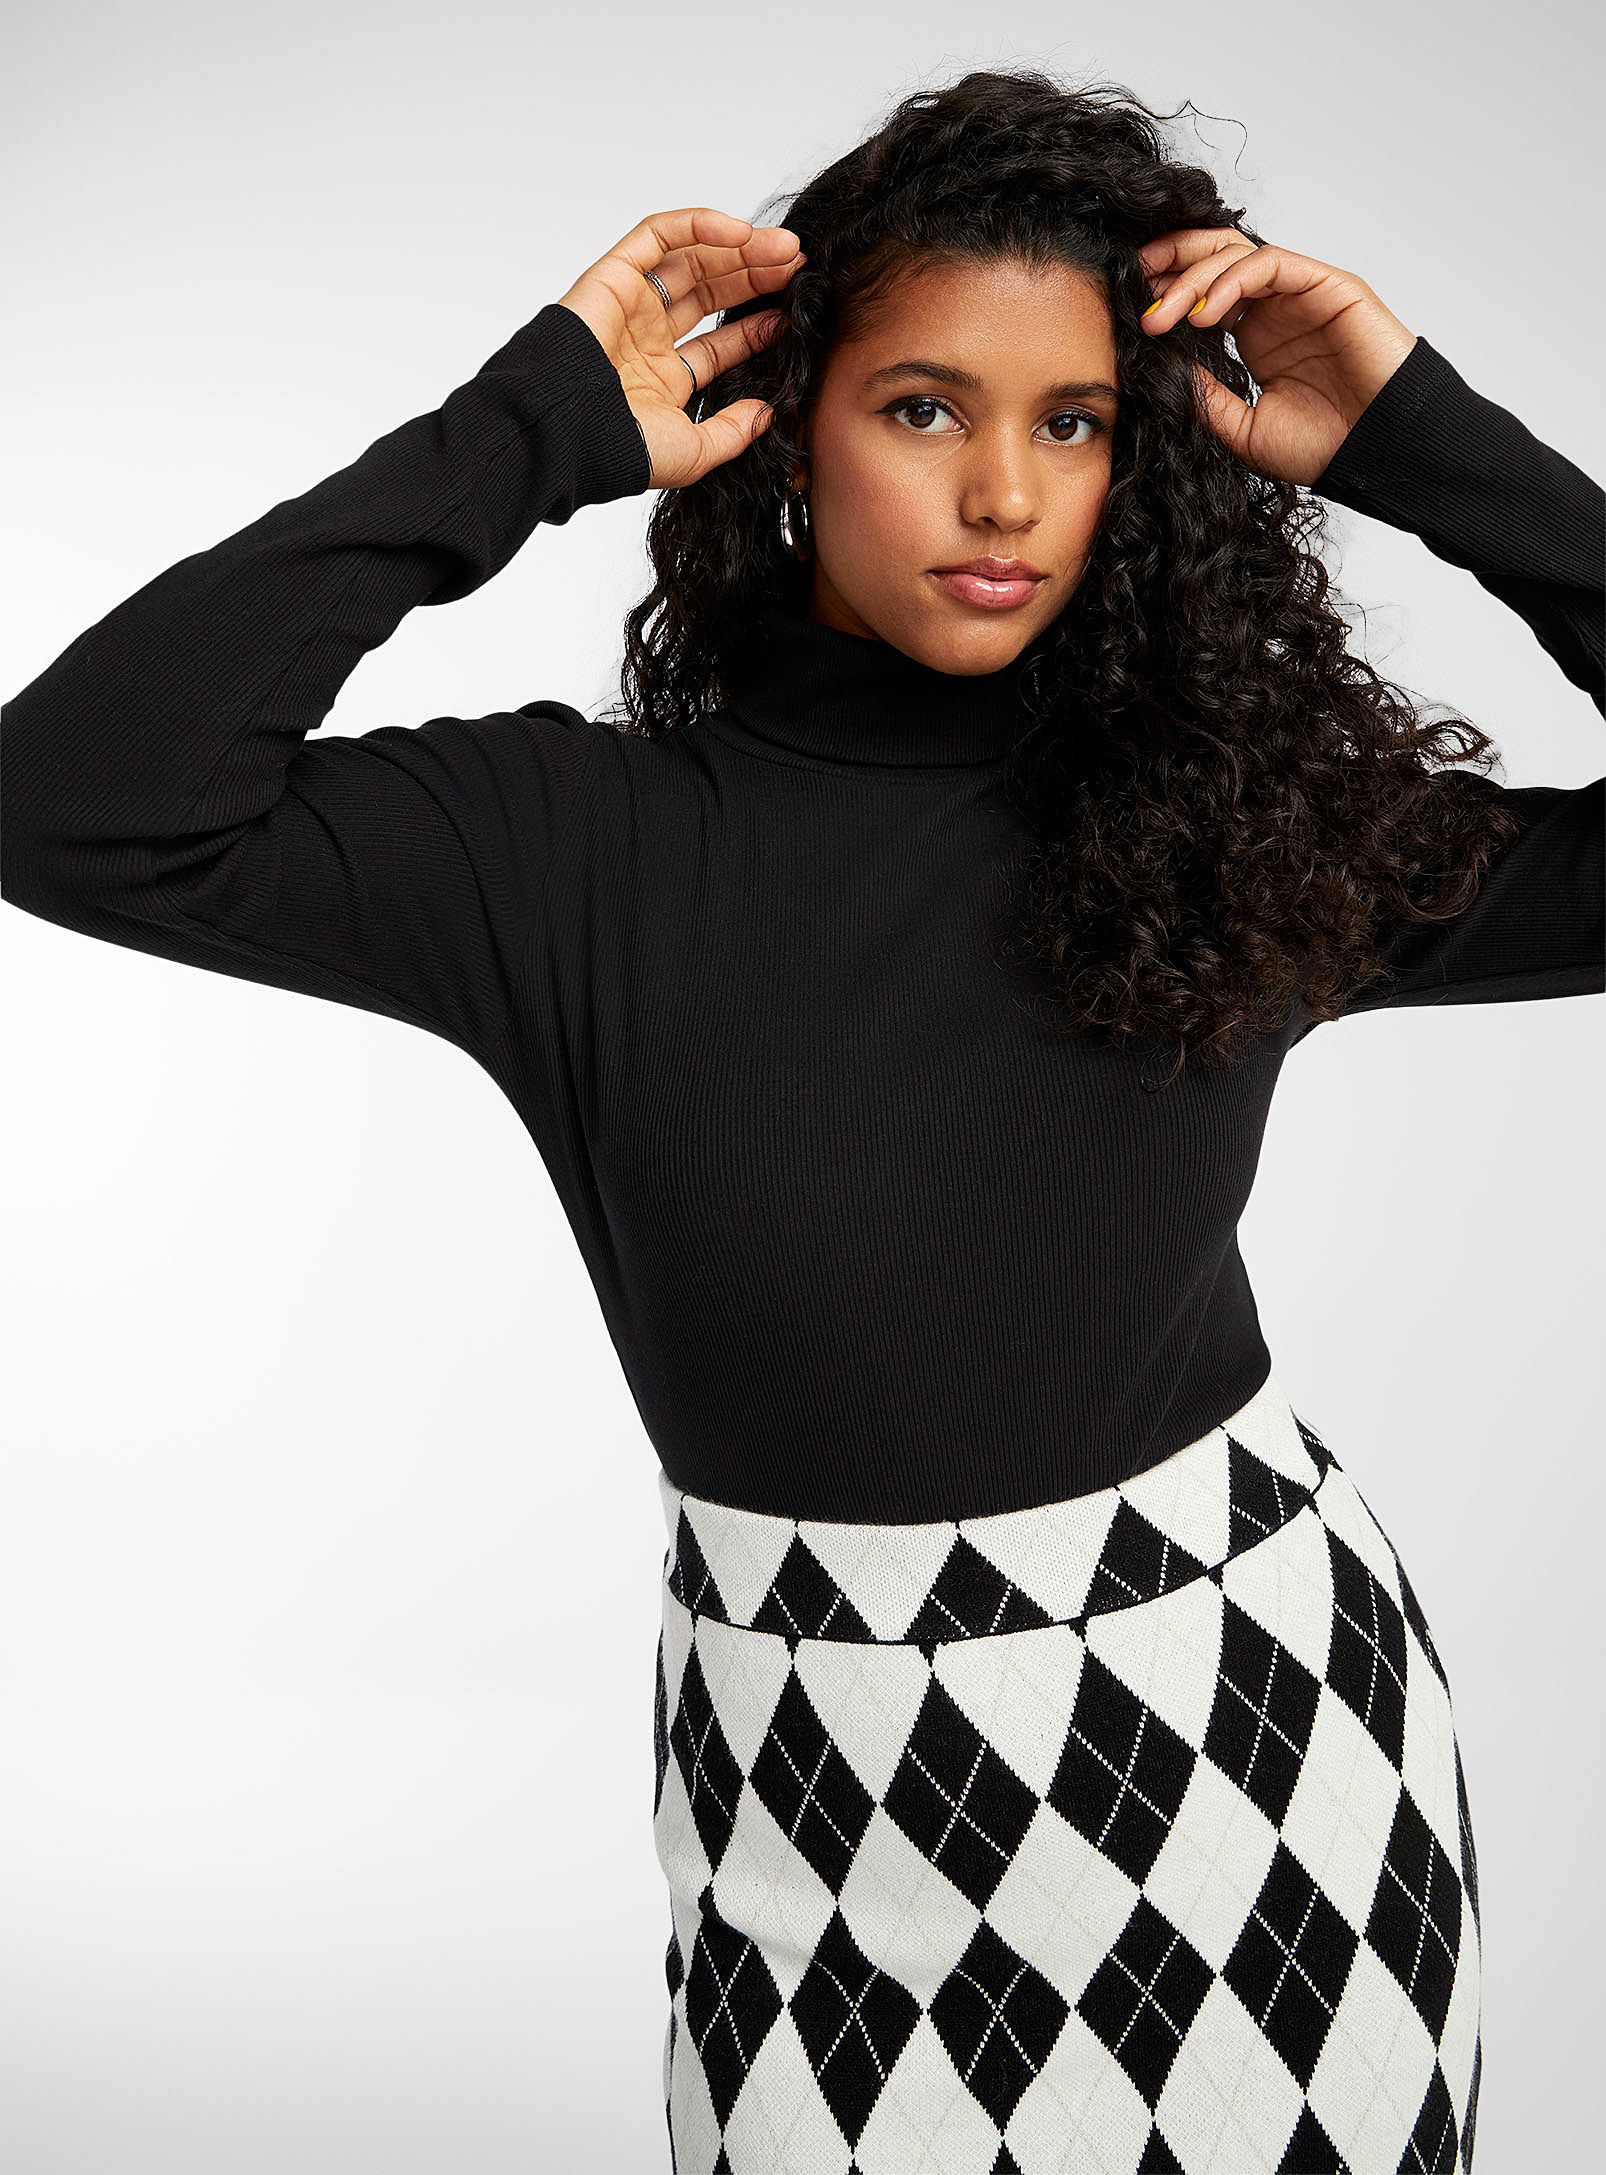 a person wearing the turtleneck with a patterned skirt